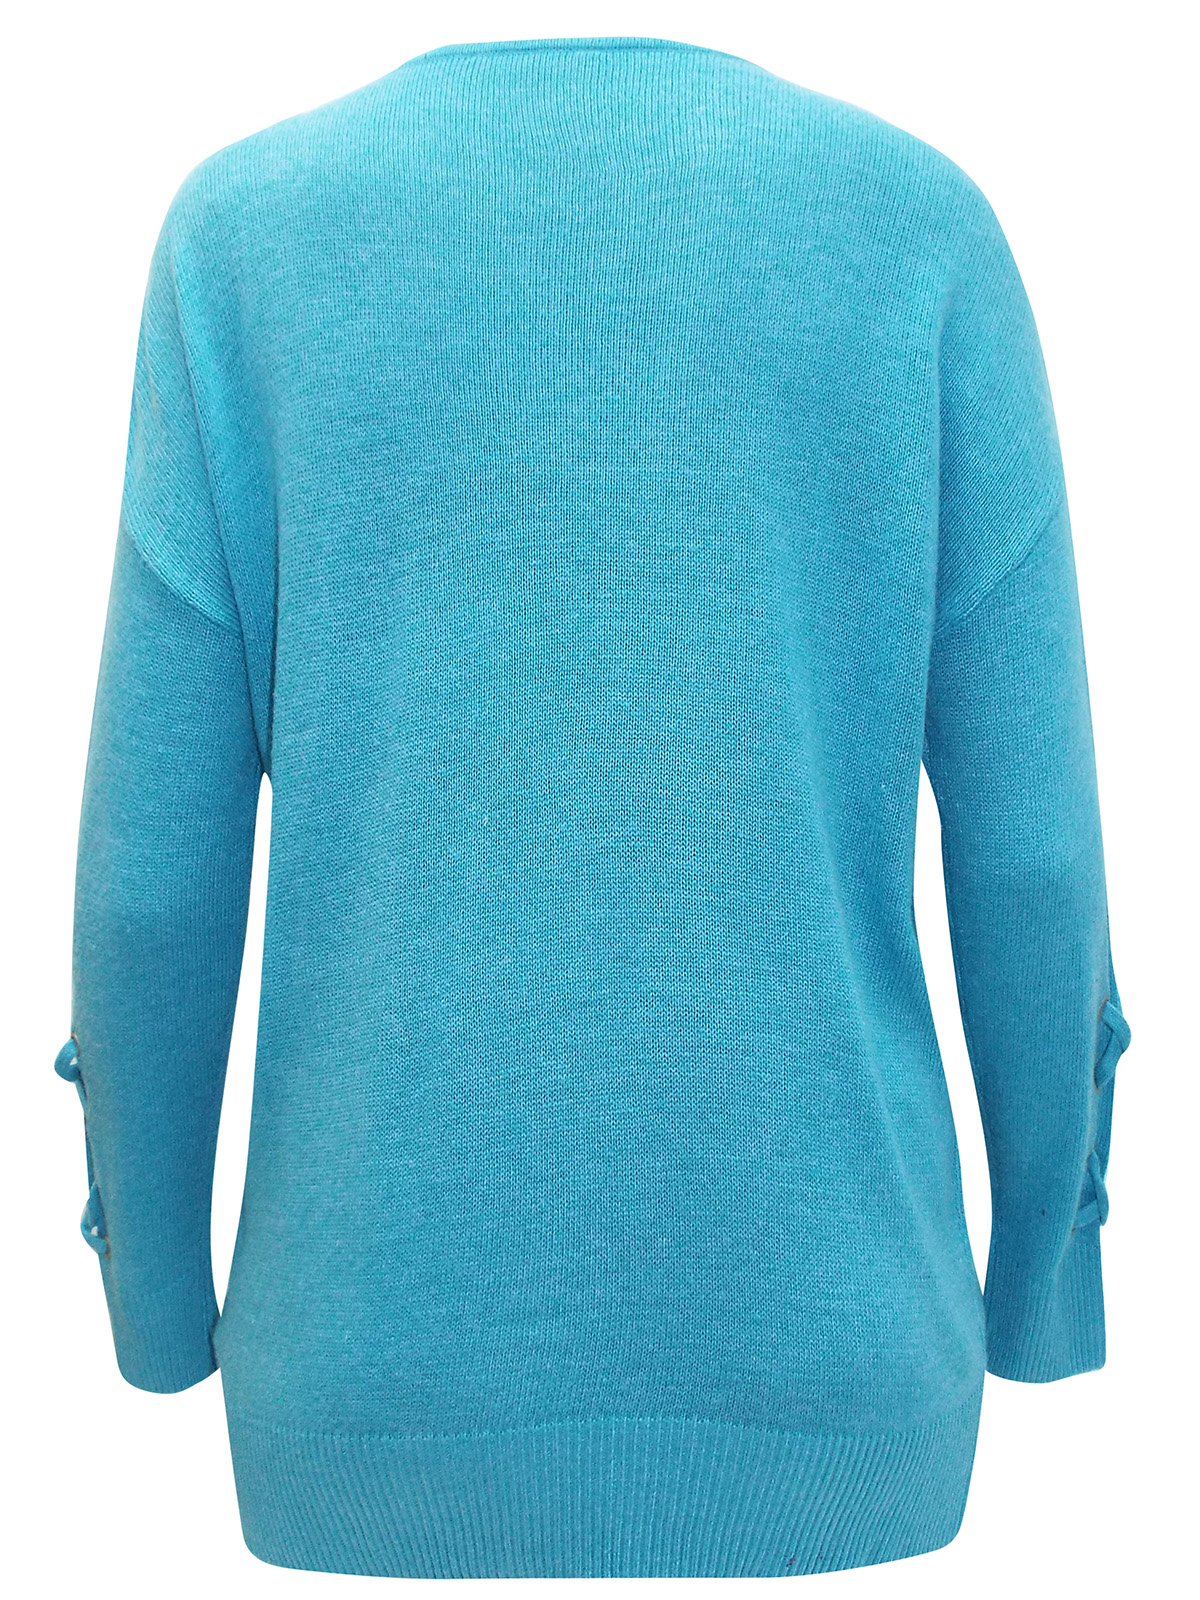 Bonmarché - - Bonmarché TURQUOISE Lattice Sleeve Knitted Jumper with ...